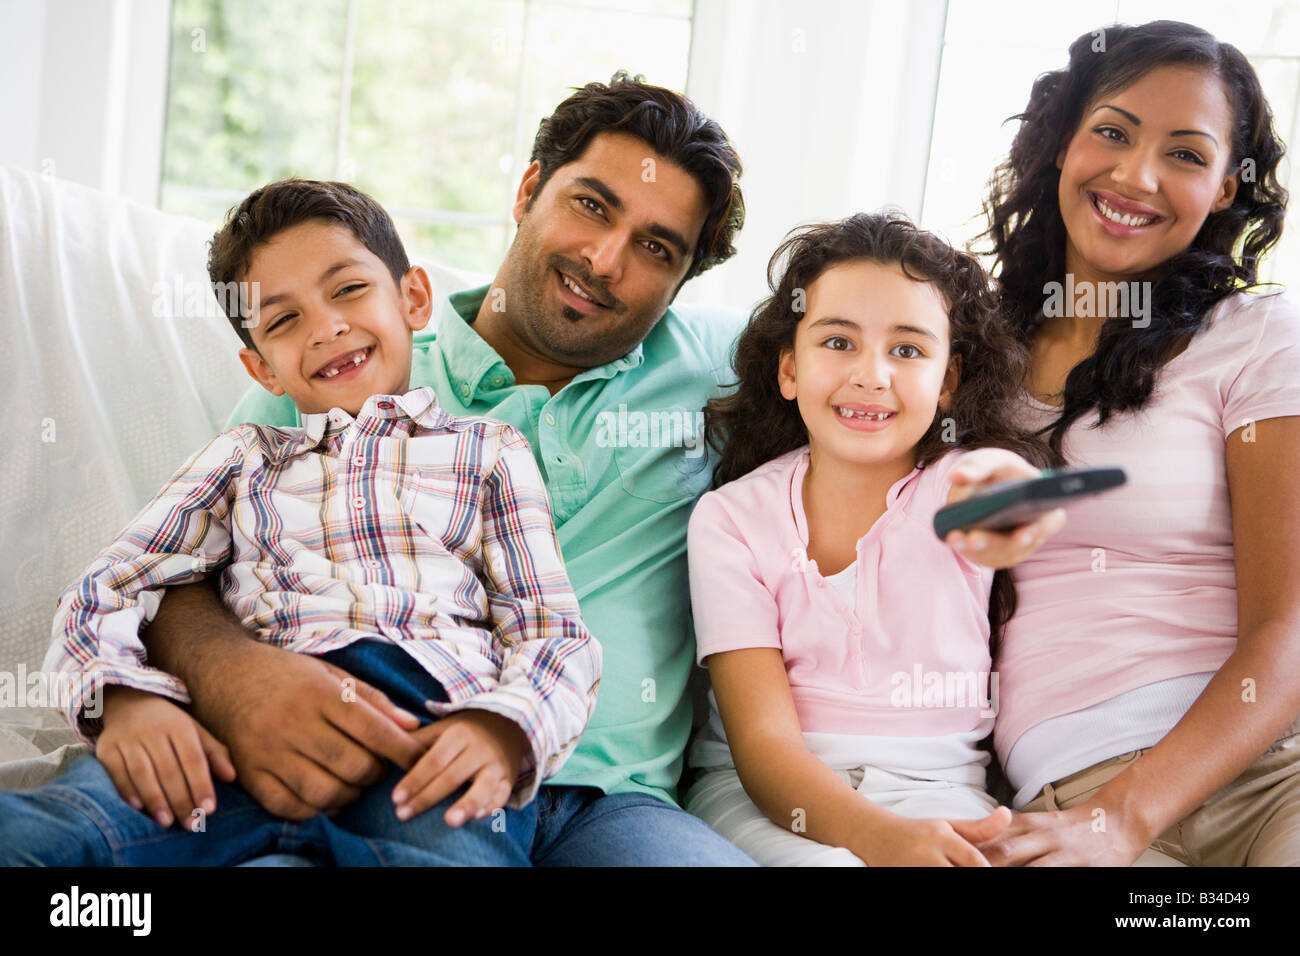 Family in living room with remote control smiling (high key/selective focus) Stock Photo